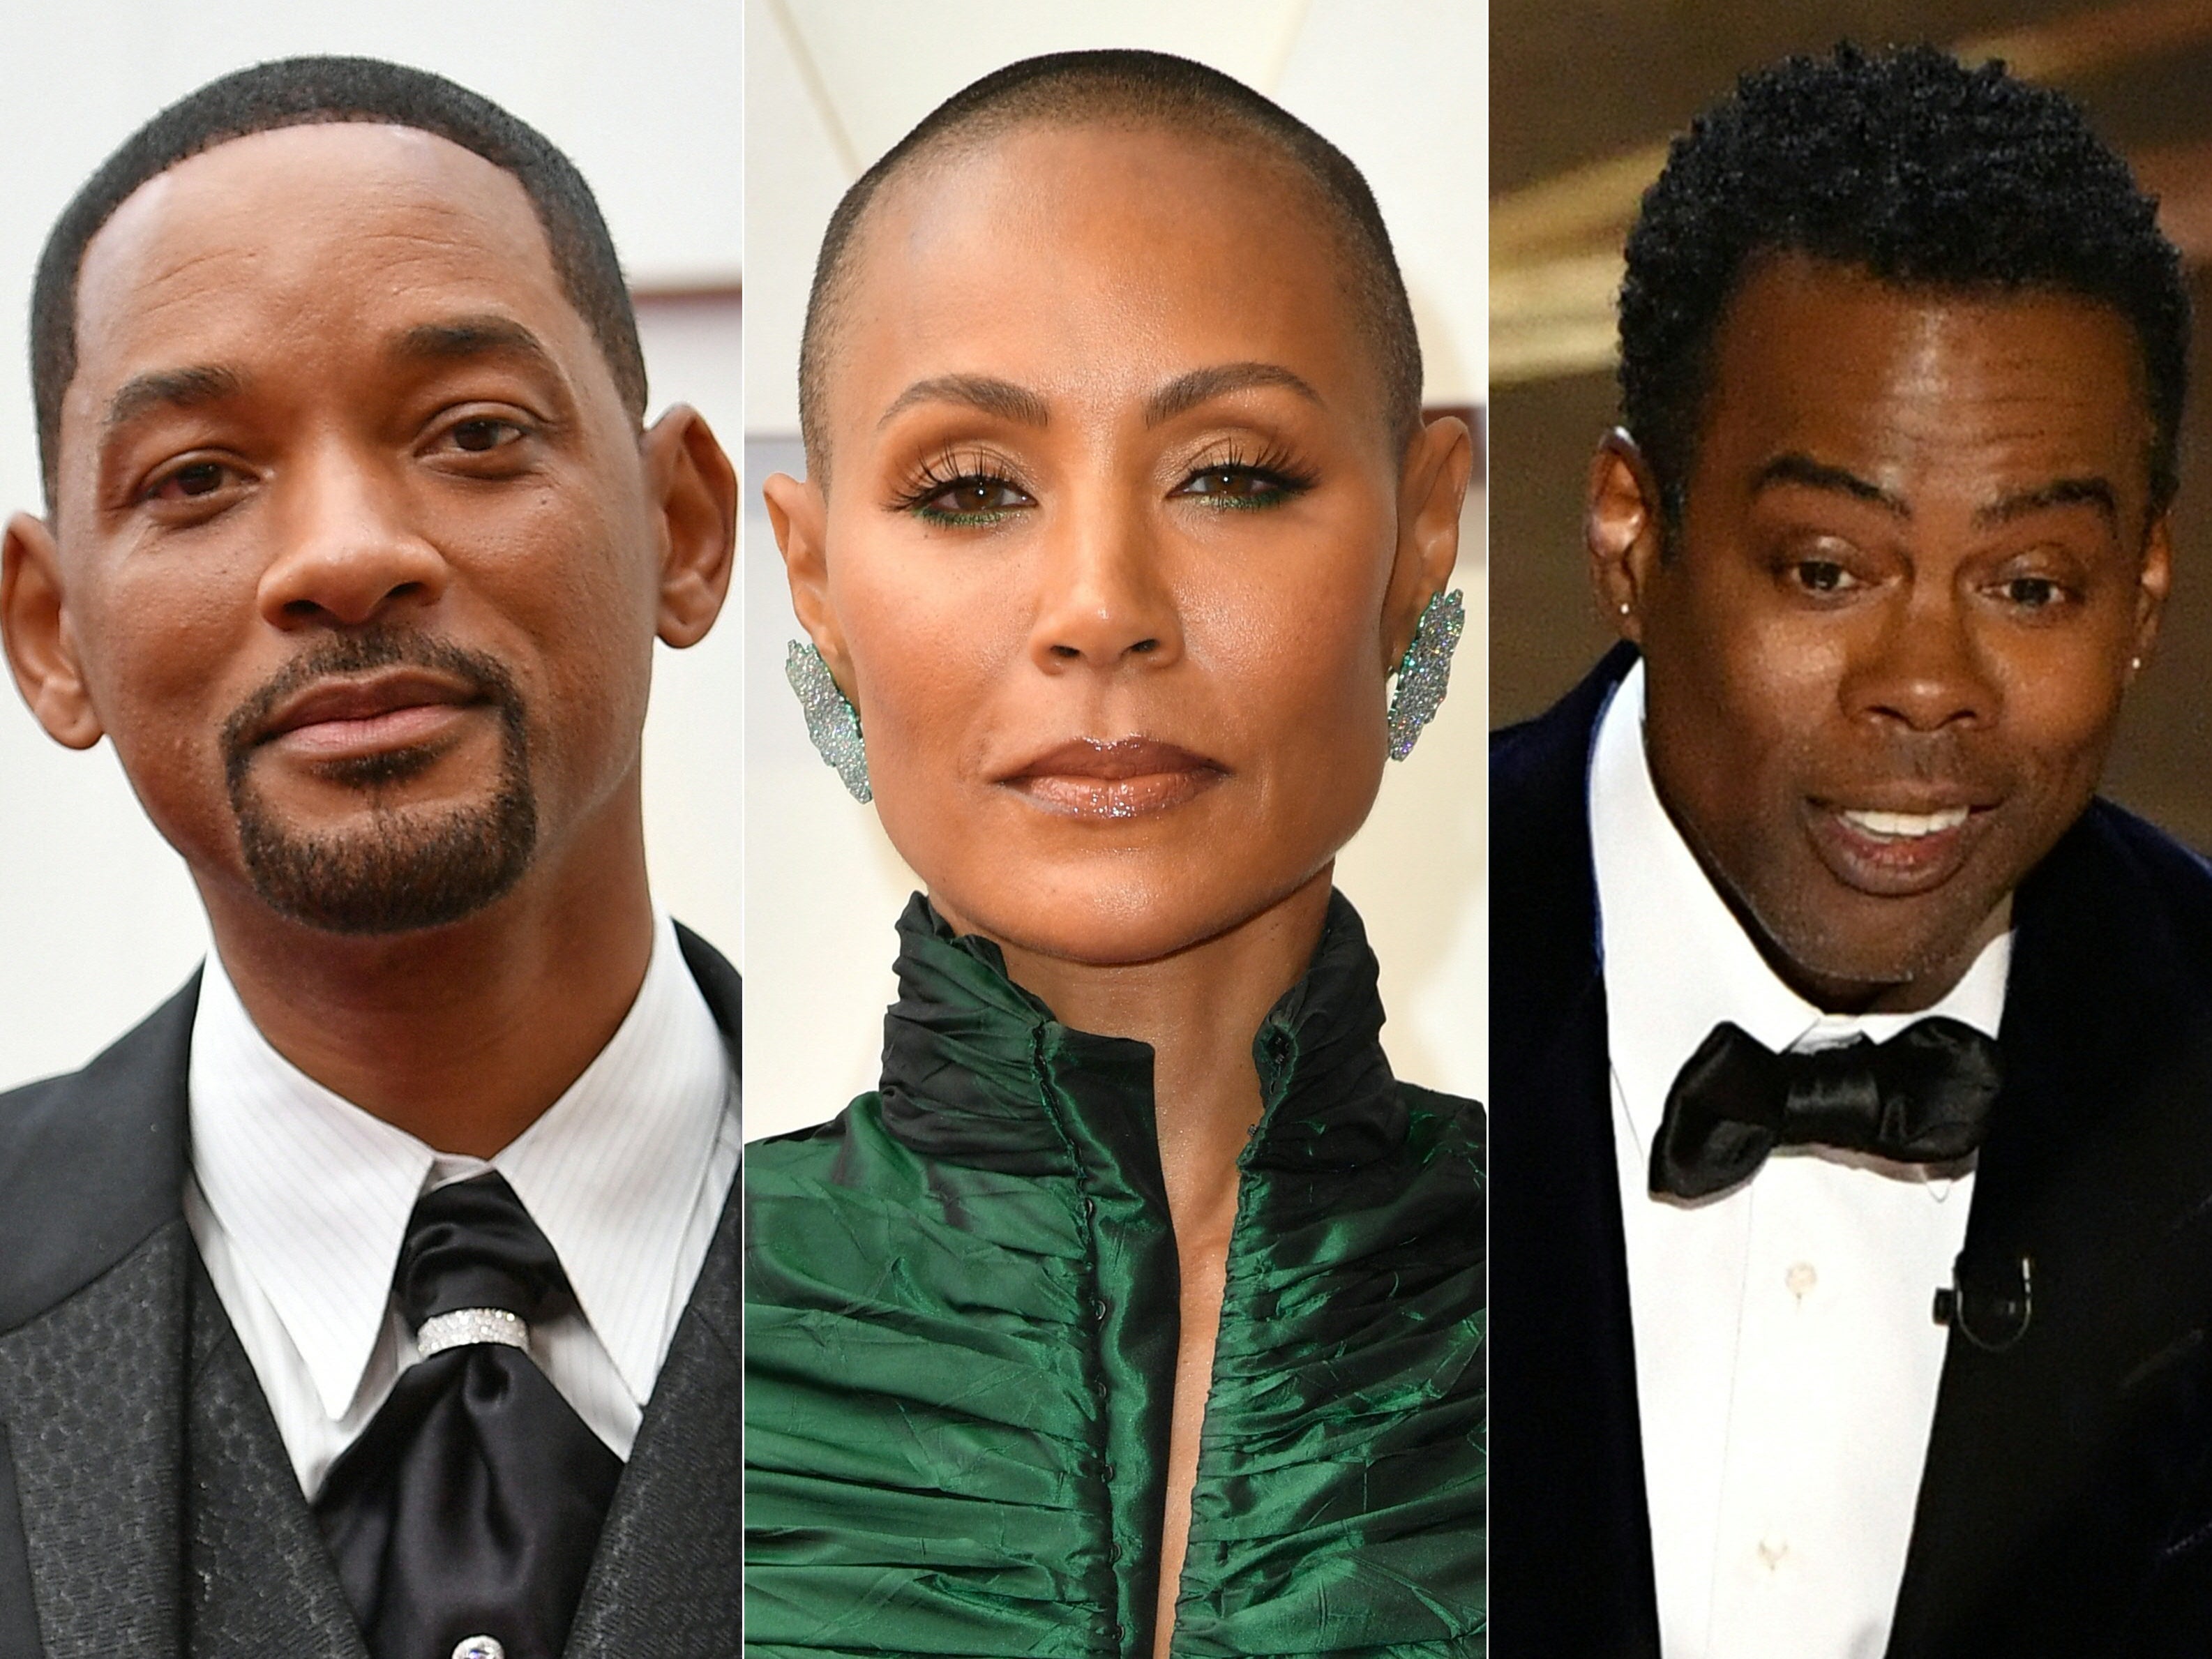 Will Smith hit Chris Rock after the comedian made a joke about his wife, Jada Pinkett Smith